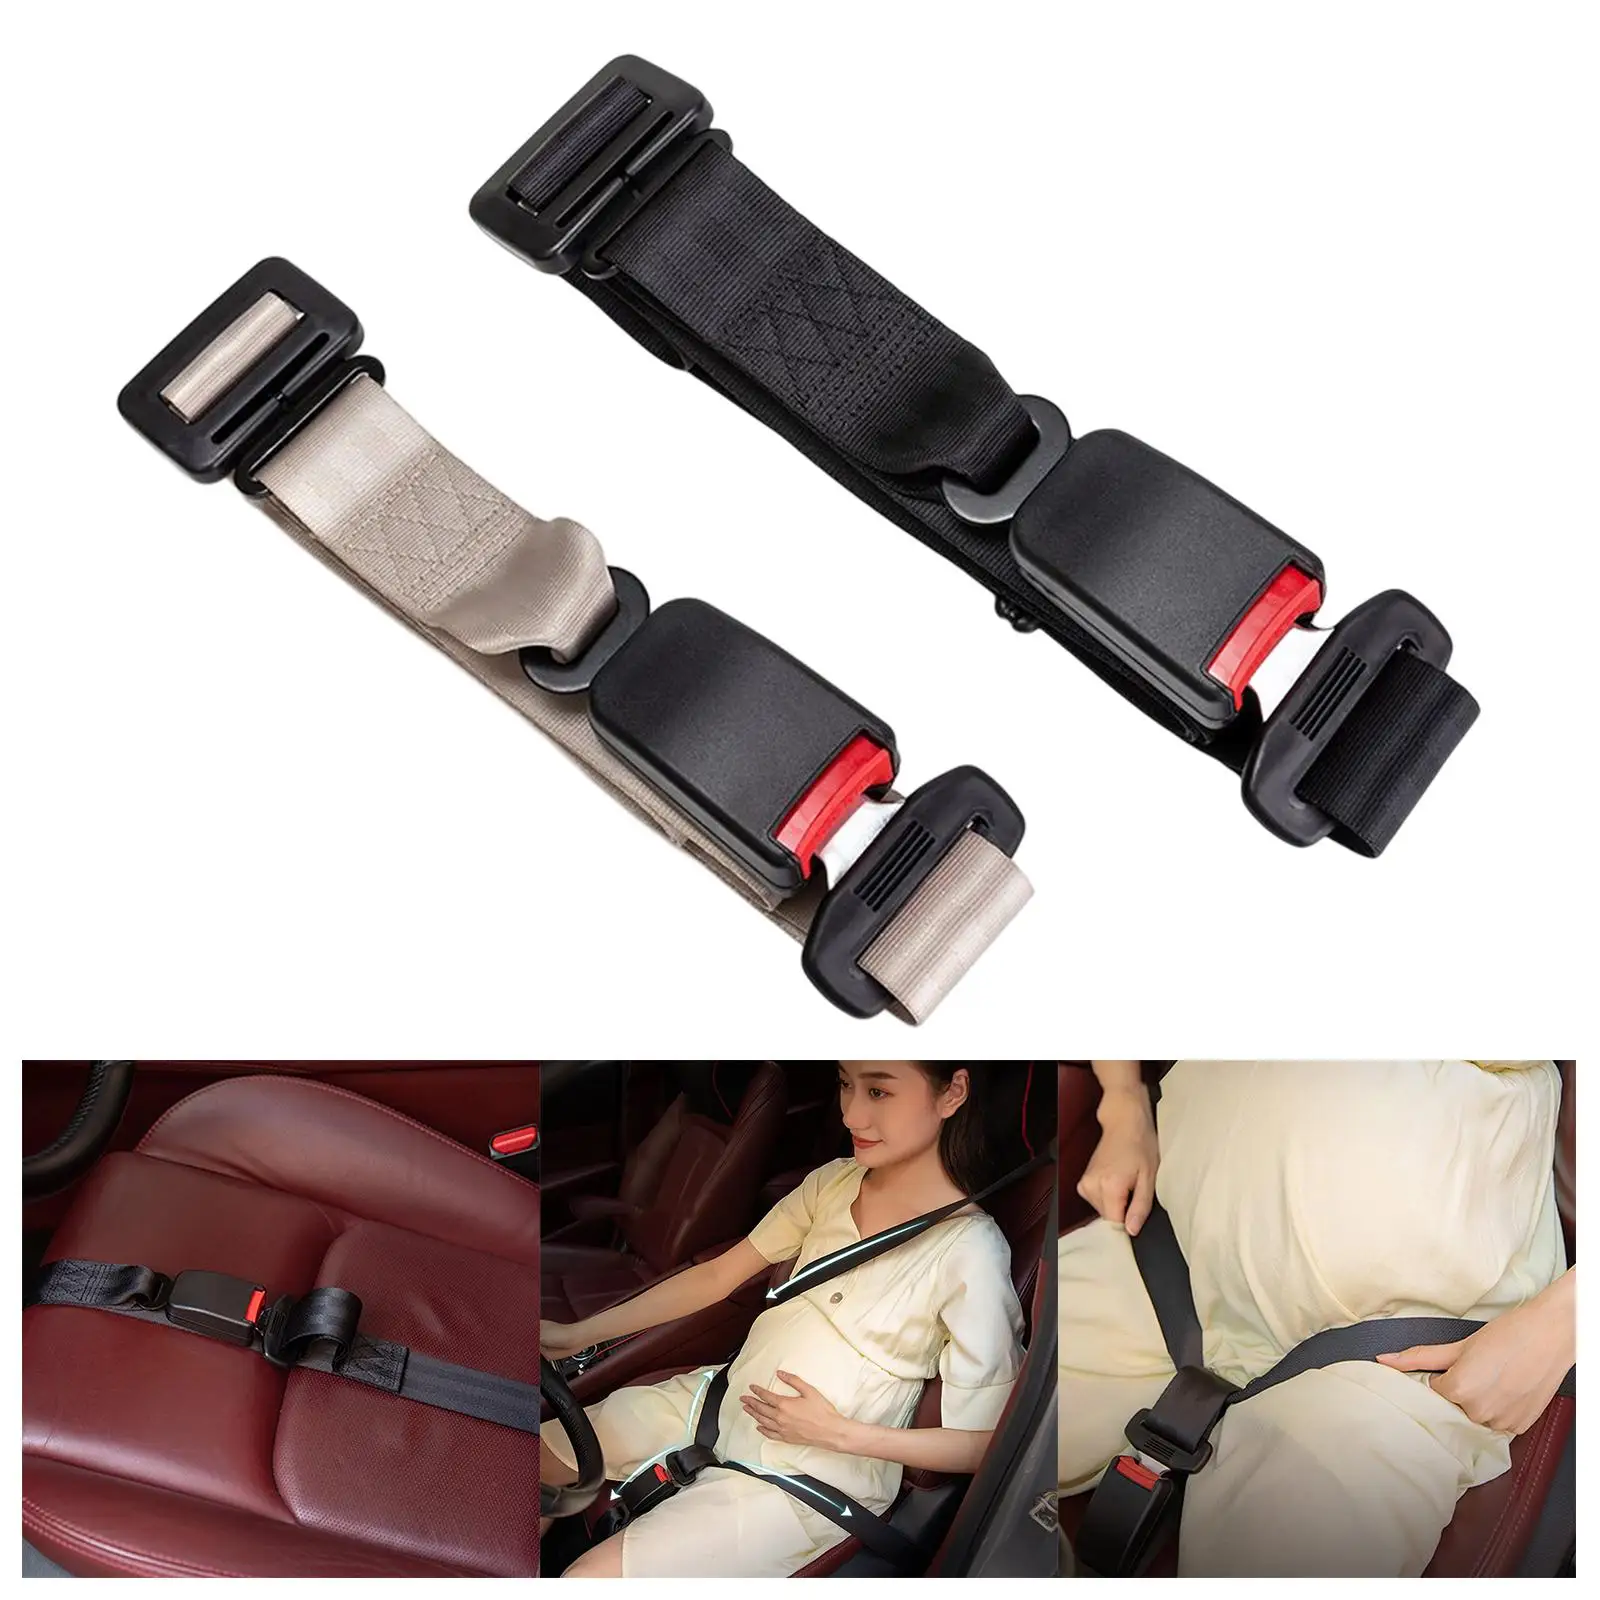 Pregnancy Car Seat Safety belt Accessories for Pregnancy Moms